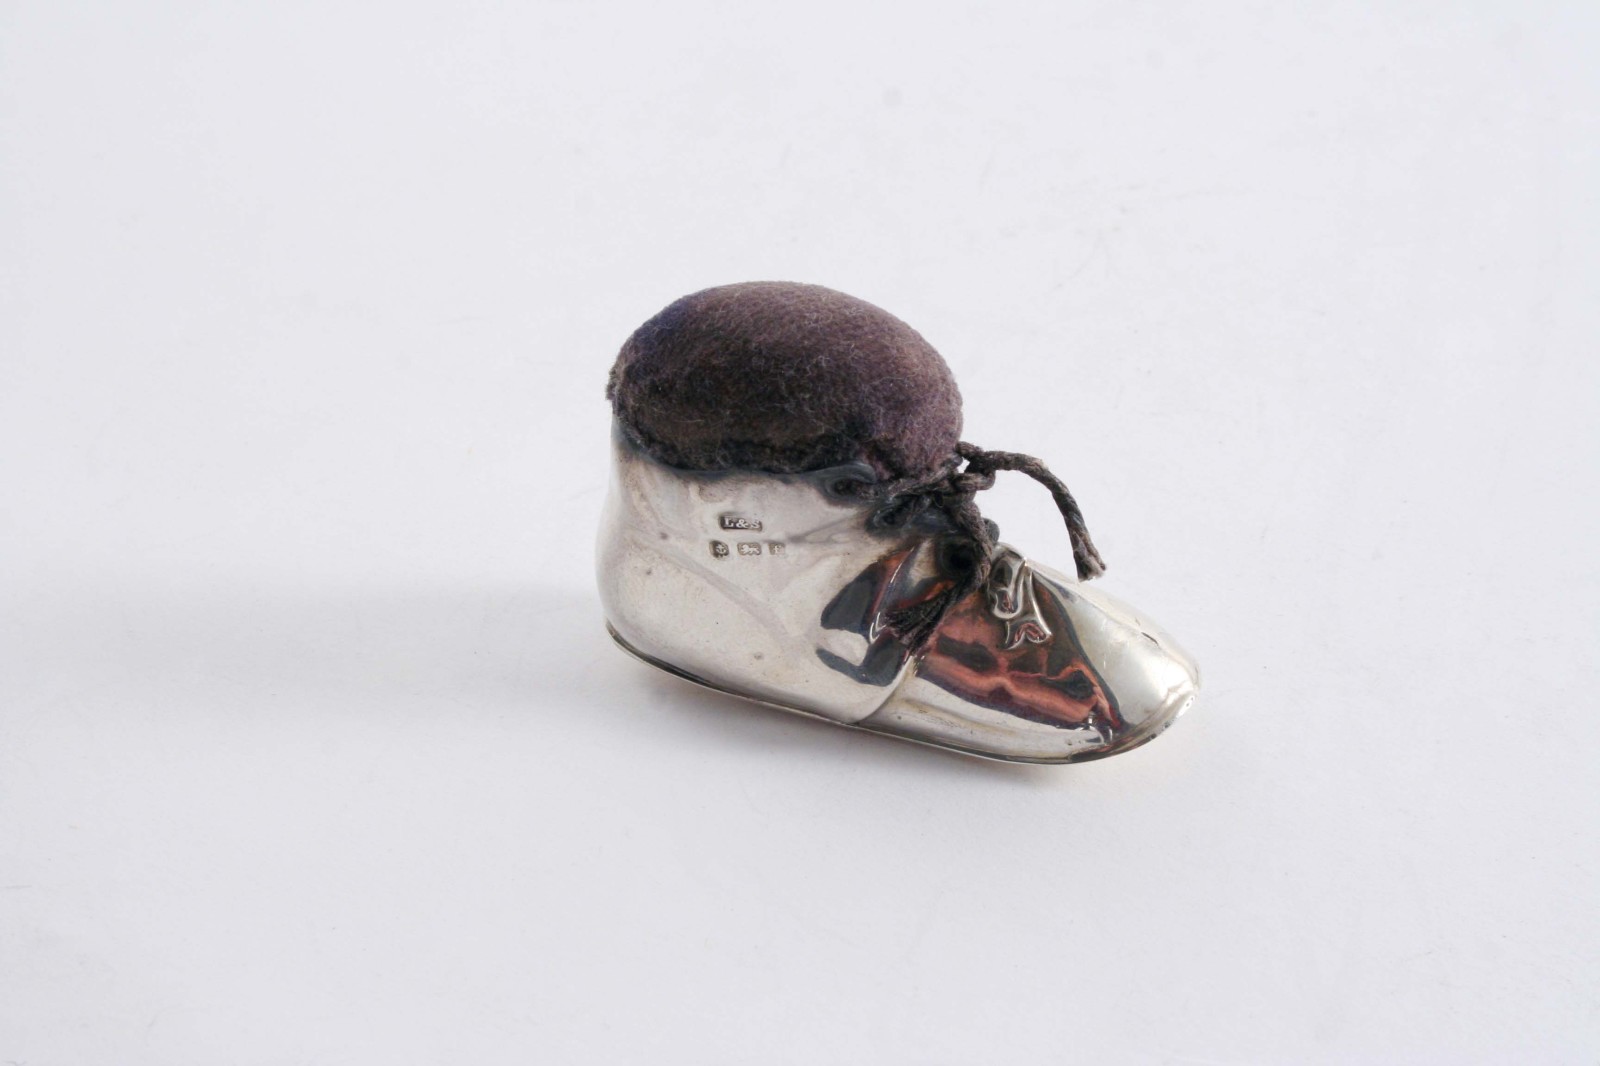 AN EDWARDIAN NOVELTY PIN CUSHION in the form of a baby`s shoe, by Levi & Salaman, Birmingham